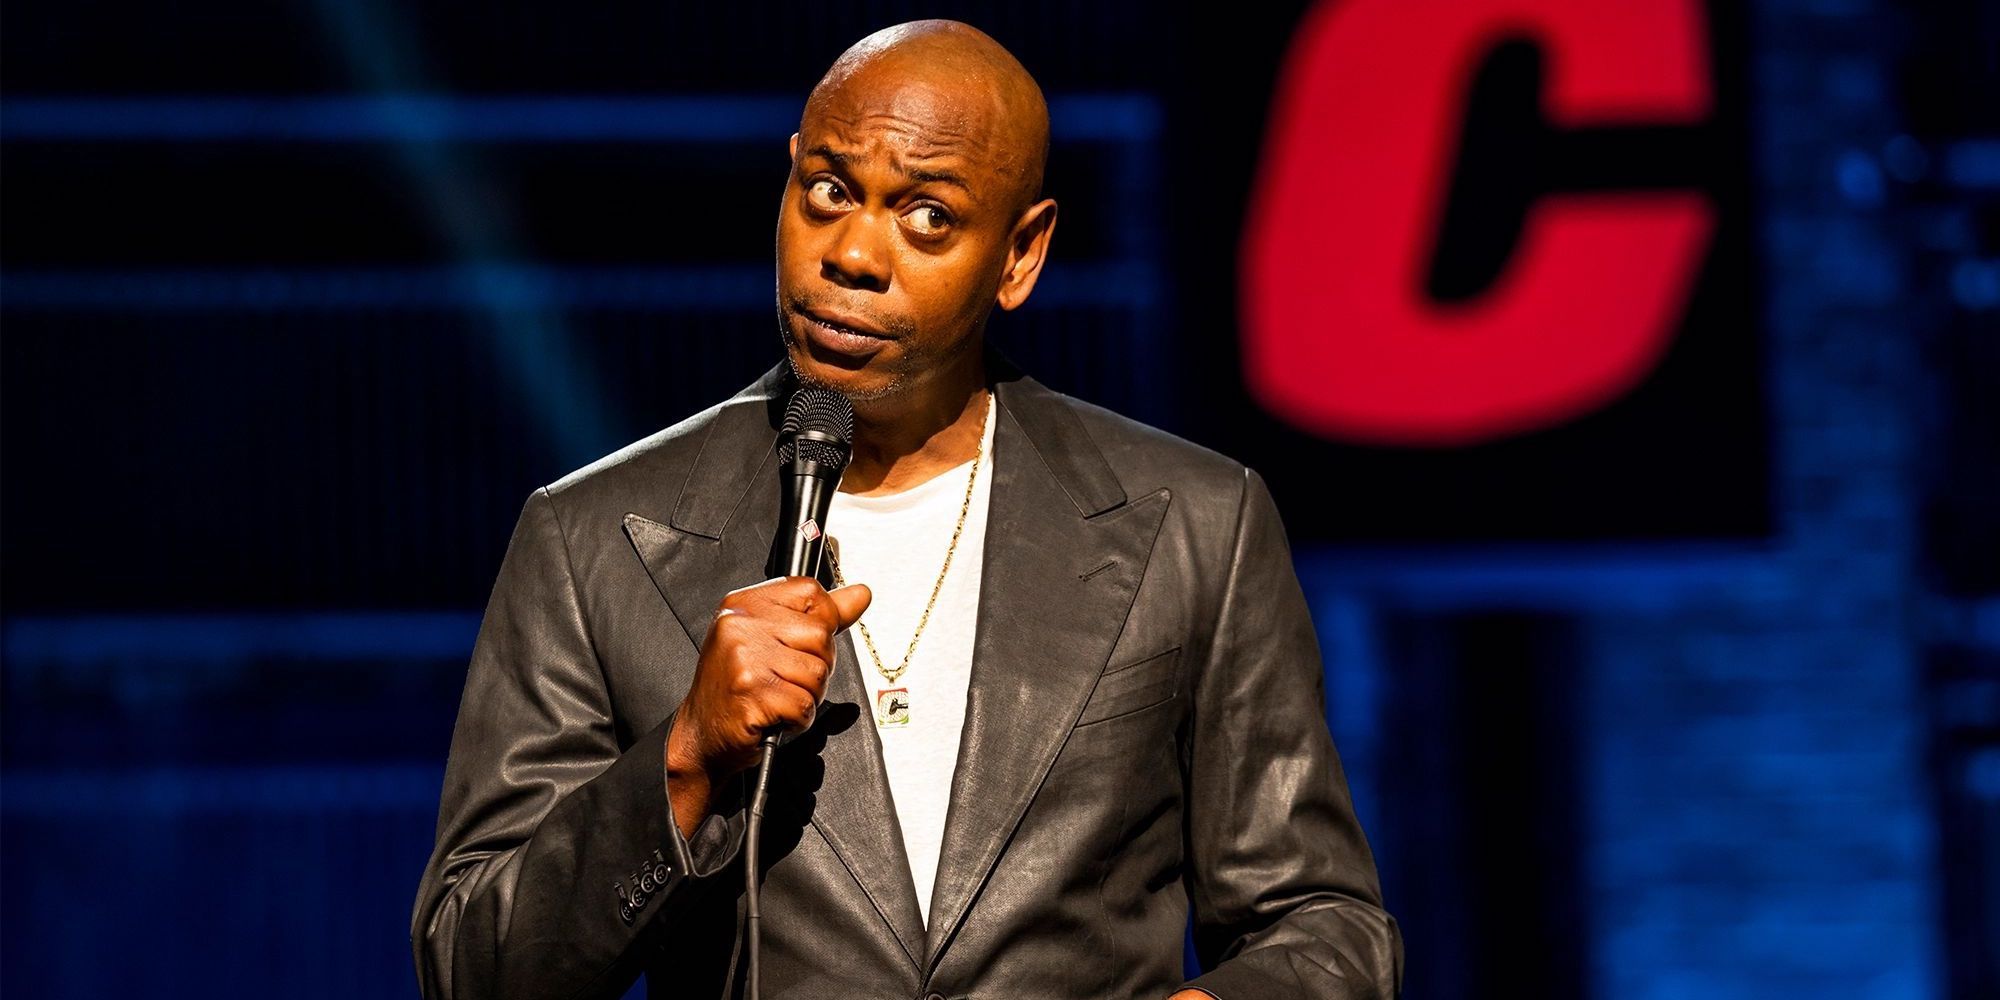 Dave Chappelle standing on stage and holding a mic.